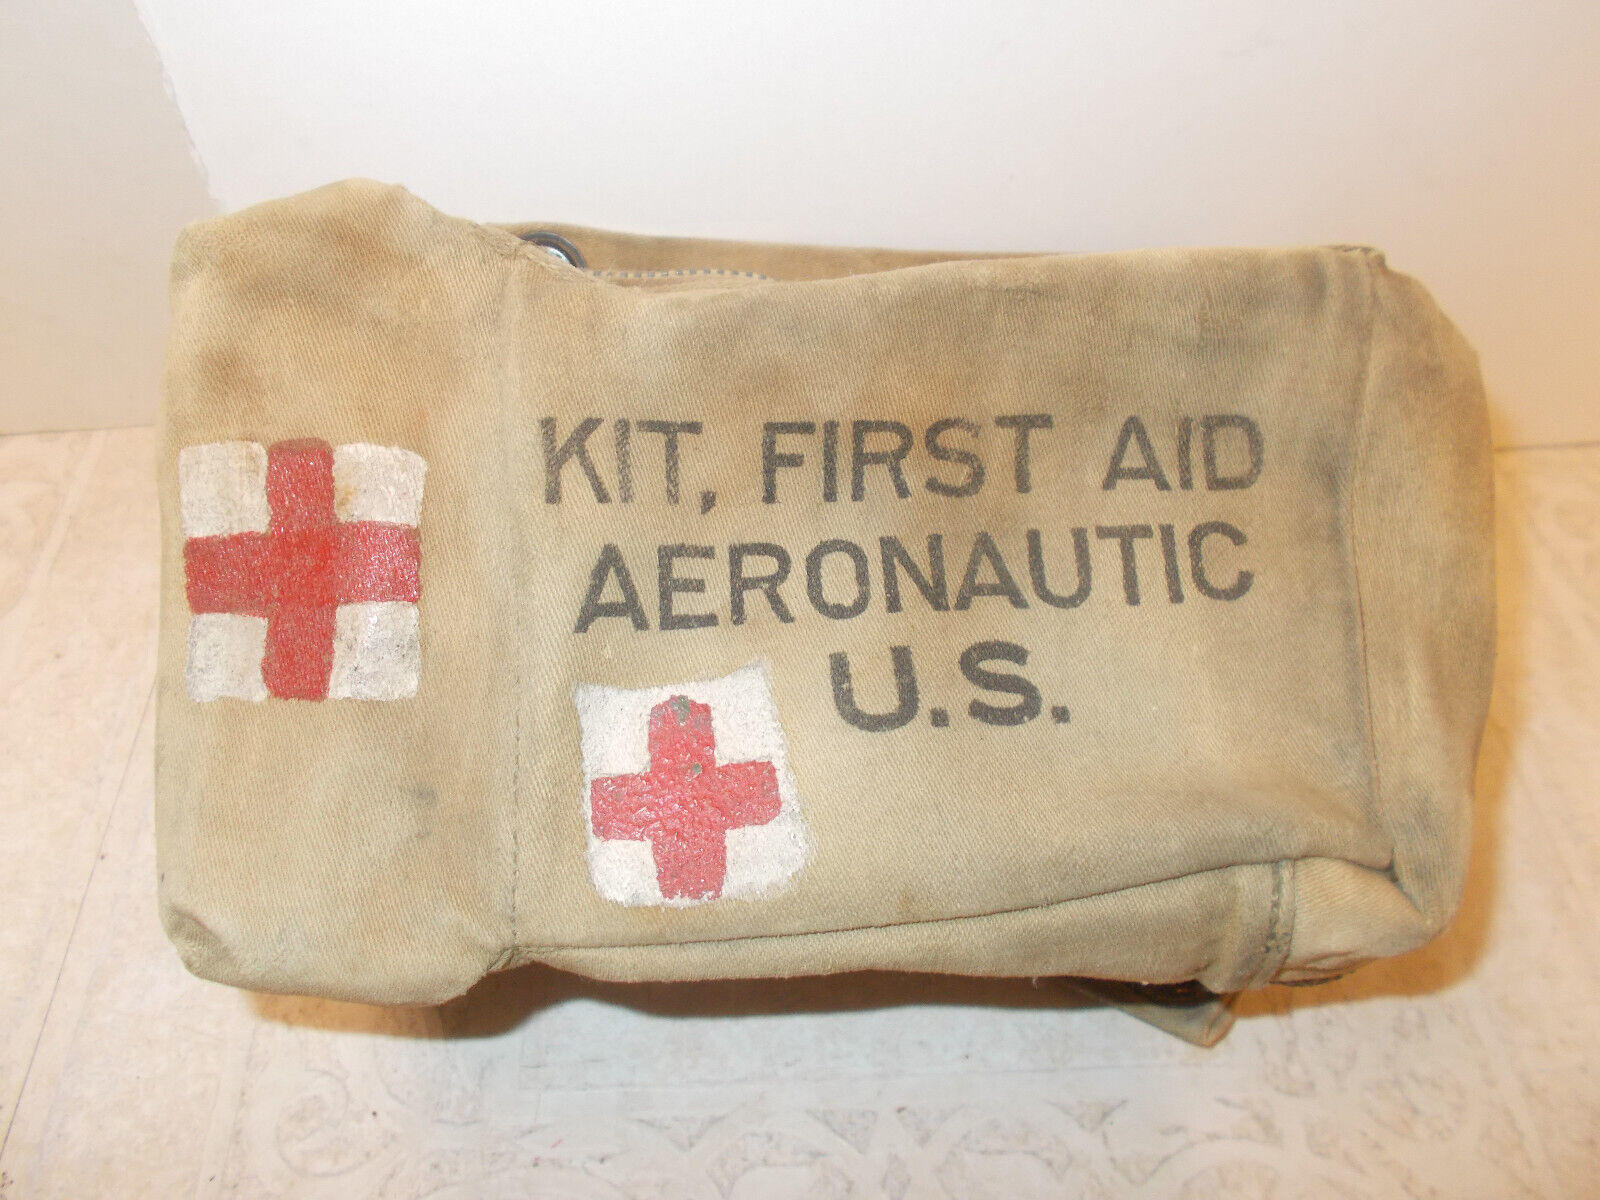 Vintage Aeronautic First Aid Kit US Military WWII? with a Few Original Contents